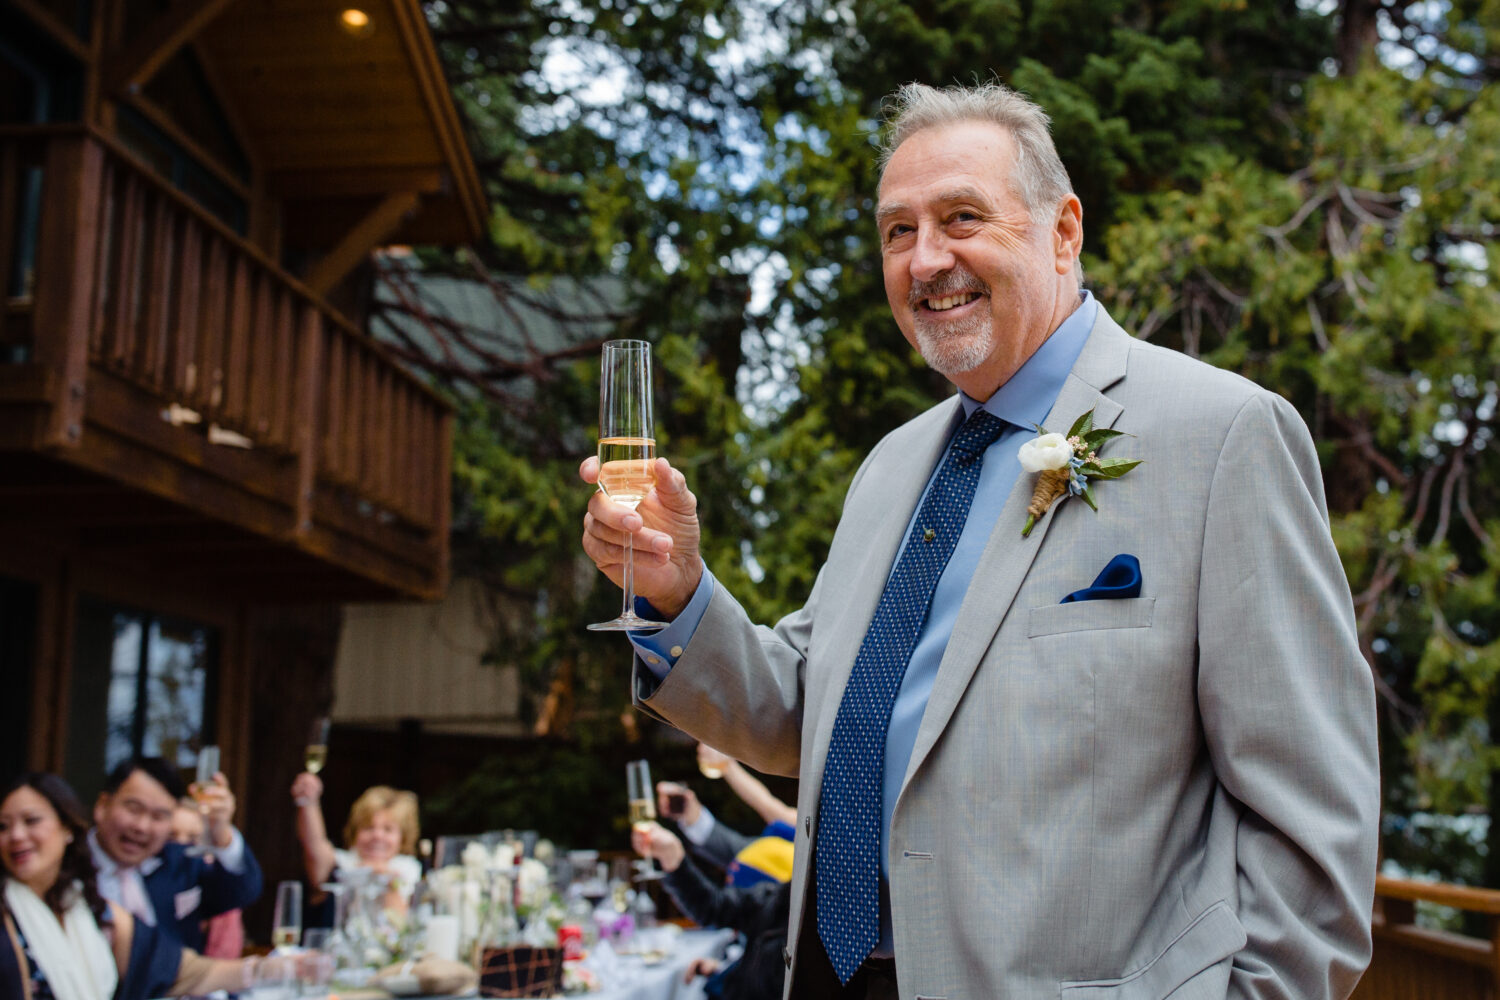 The father of the bride gives a champagne toast at a backyard wedding in Tahoe.